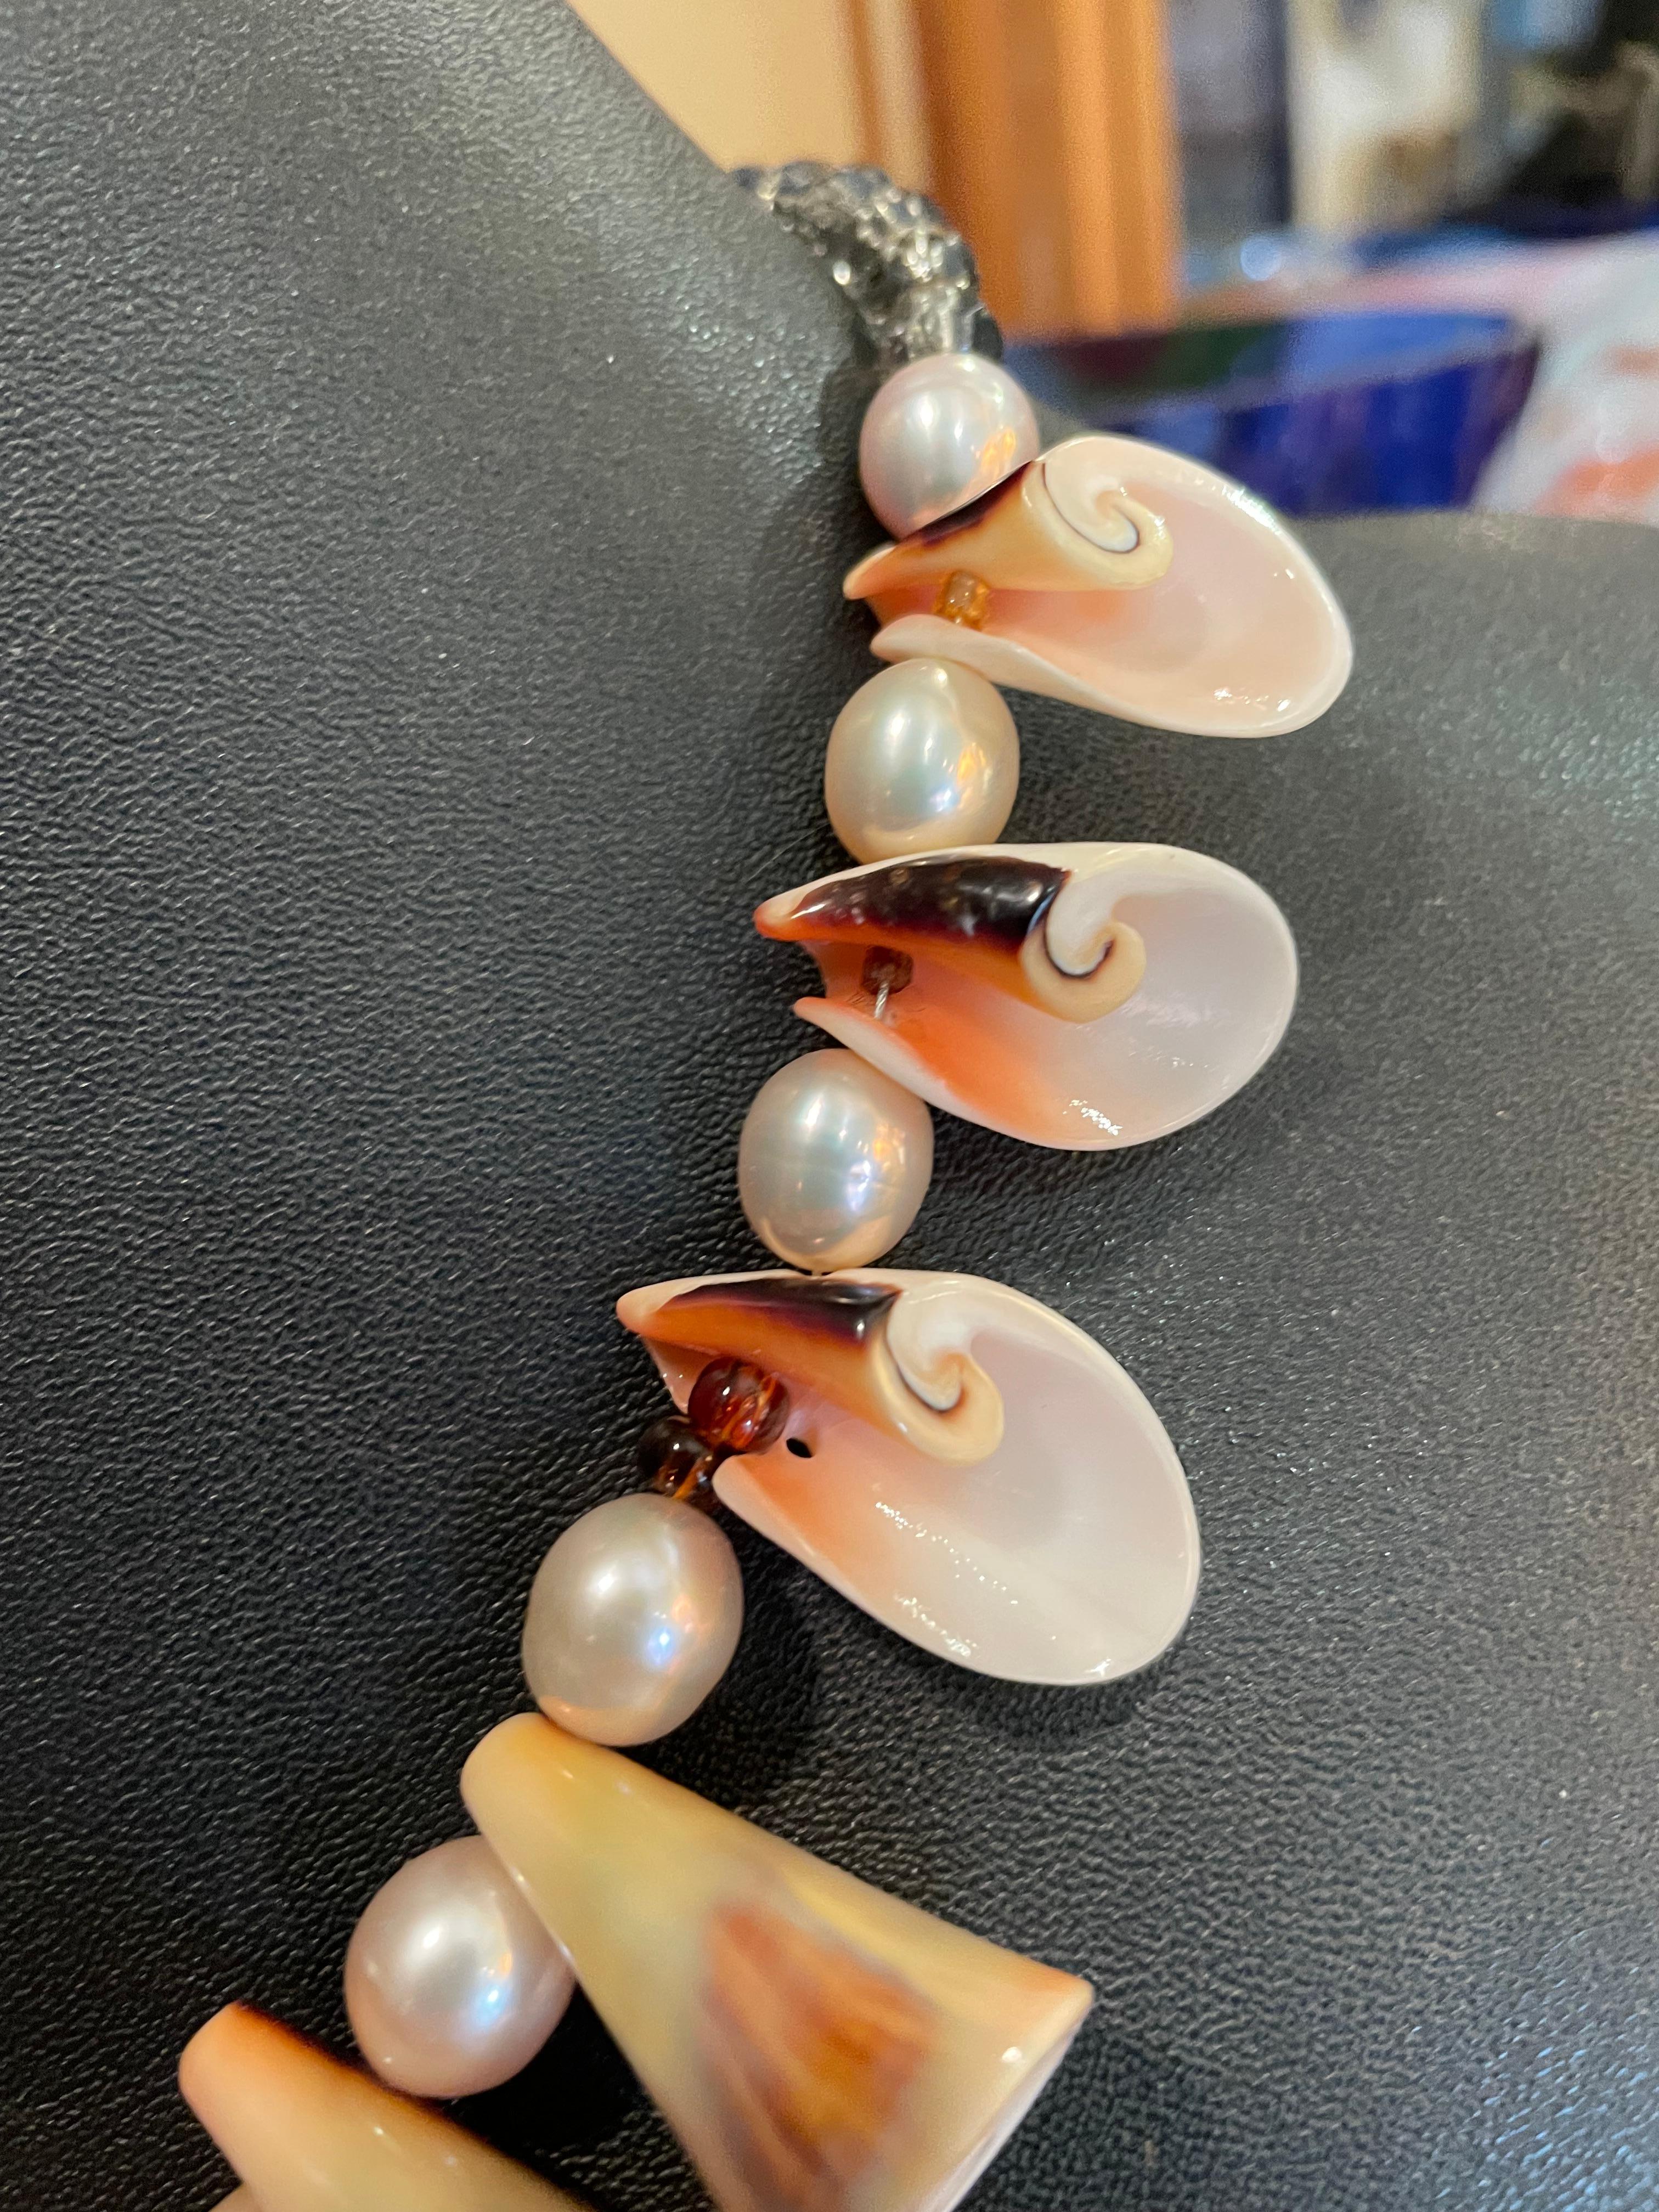 Conch Shell segments , Freshwater Pearls, and Vintage faceted crystal beads comprise this perfect necklace for Summer. The shell segments have all the natural beauty of the natural shell with peaches, browns, and creams in a lovely mix of hues. The